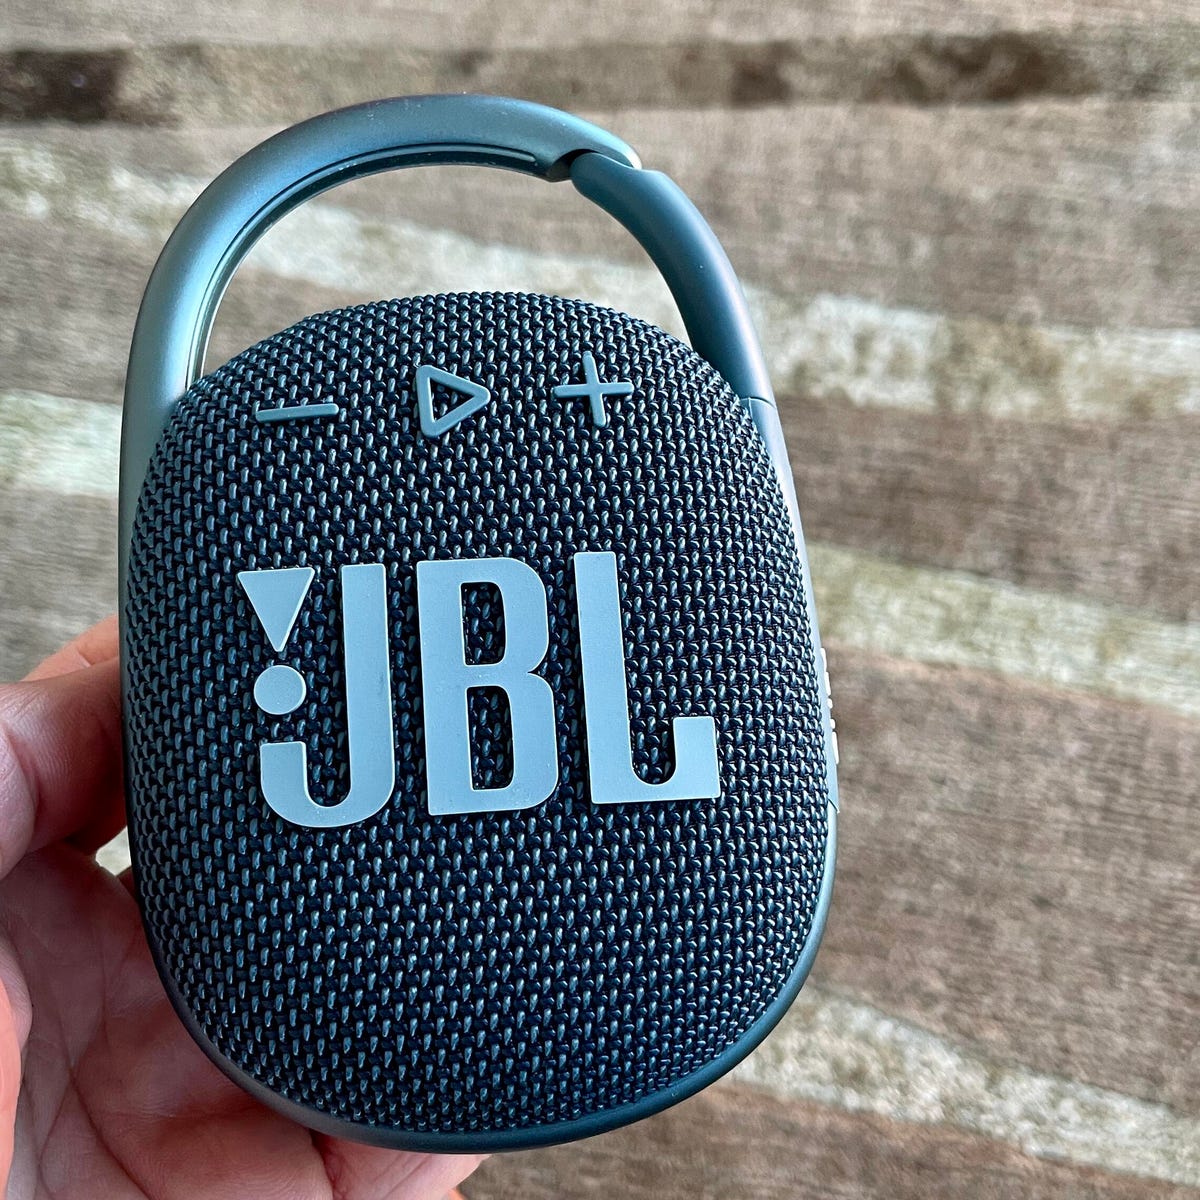 JBL Clip 4 Bluetooth speaker review: A new design and improved sound  quality - CNET